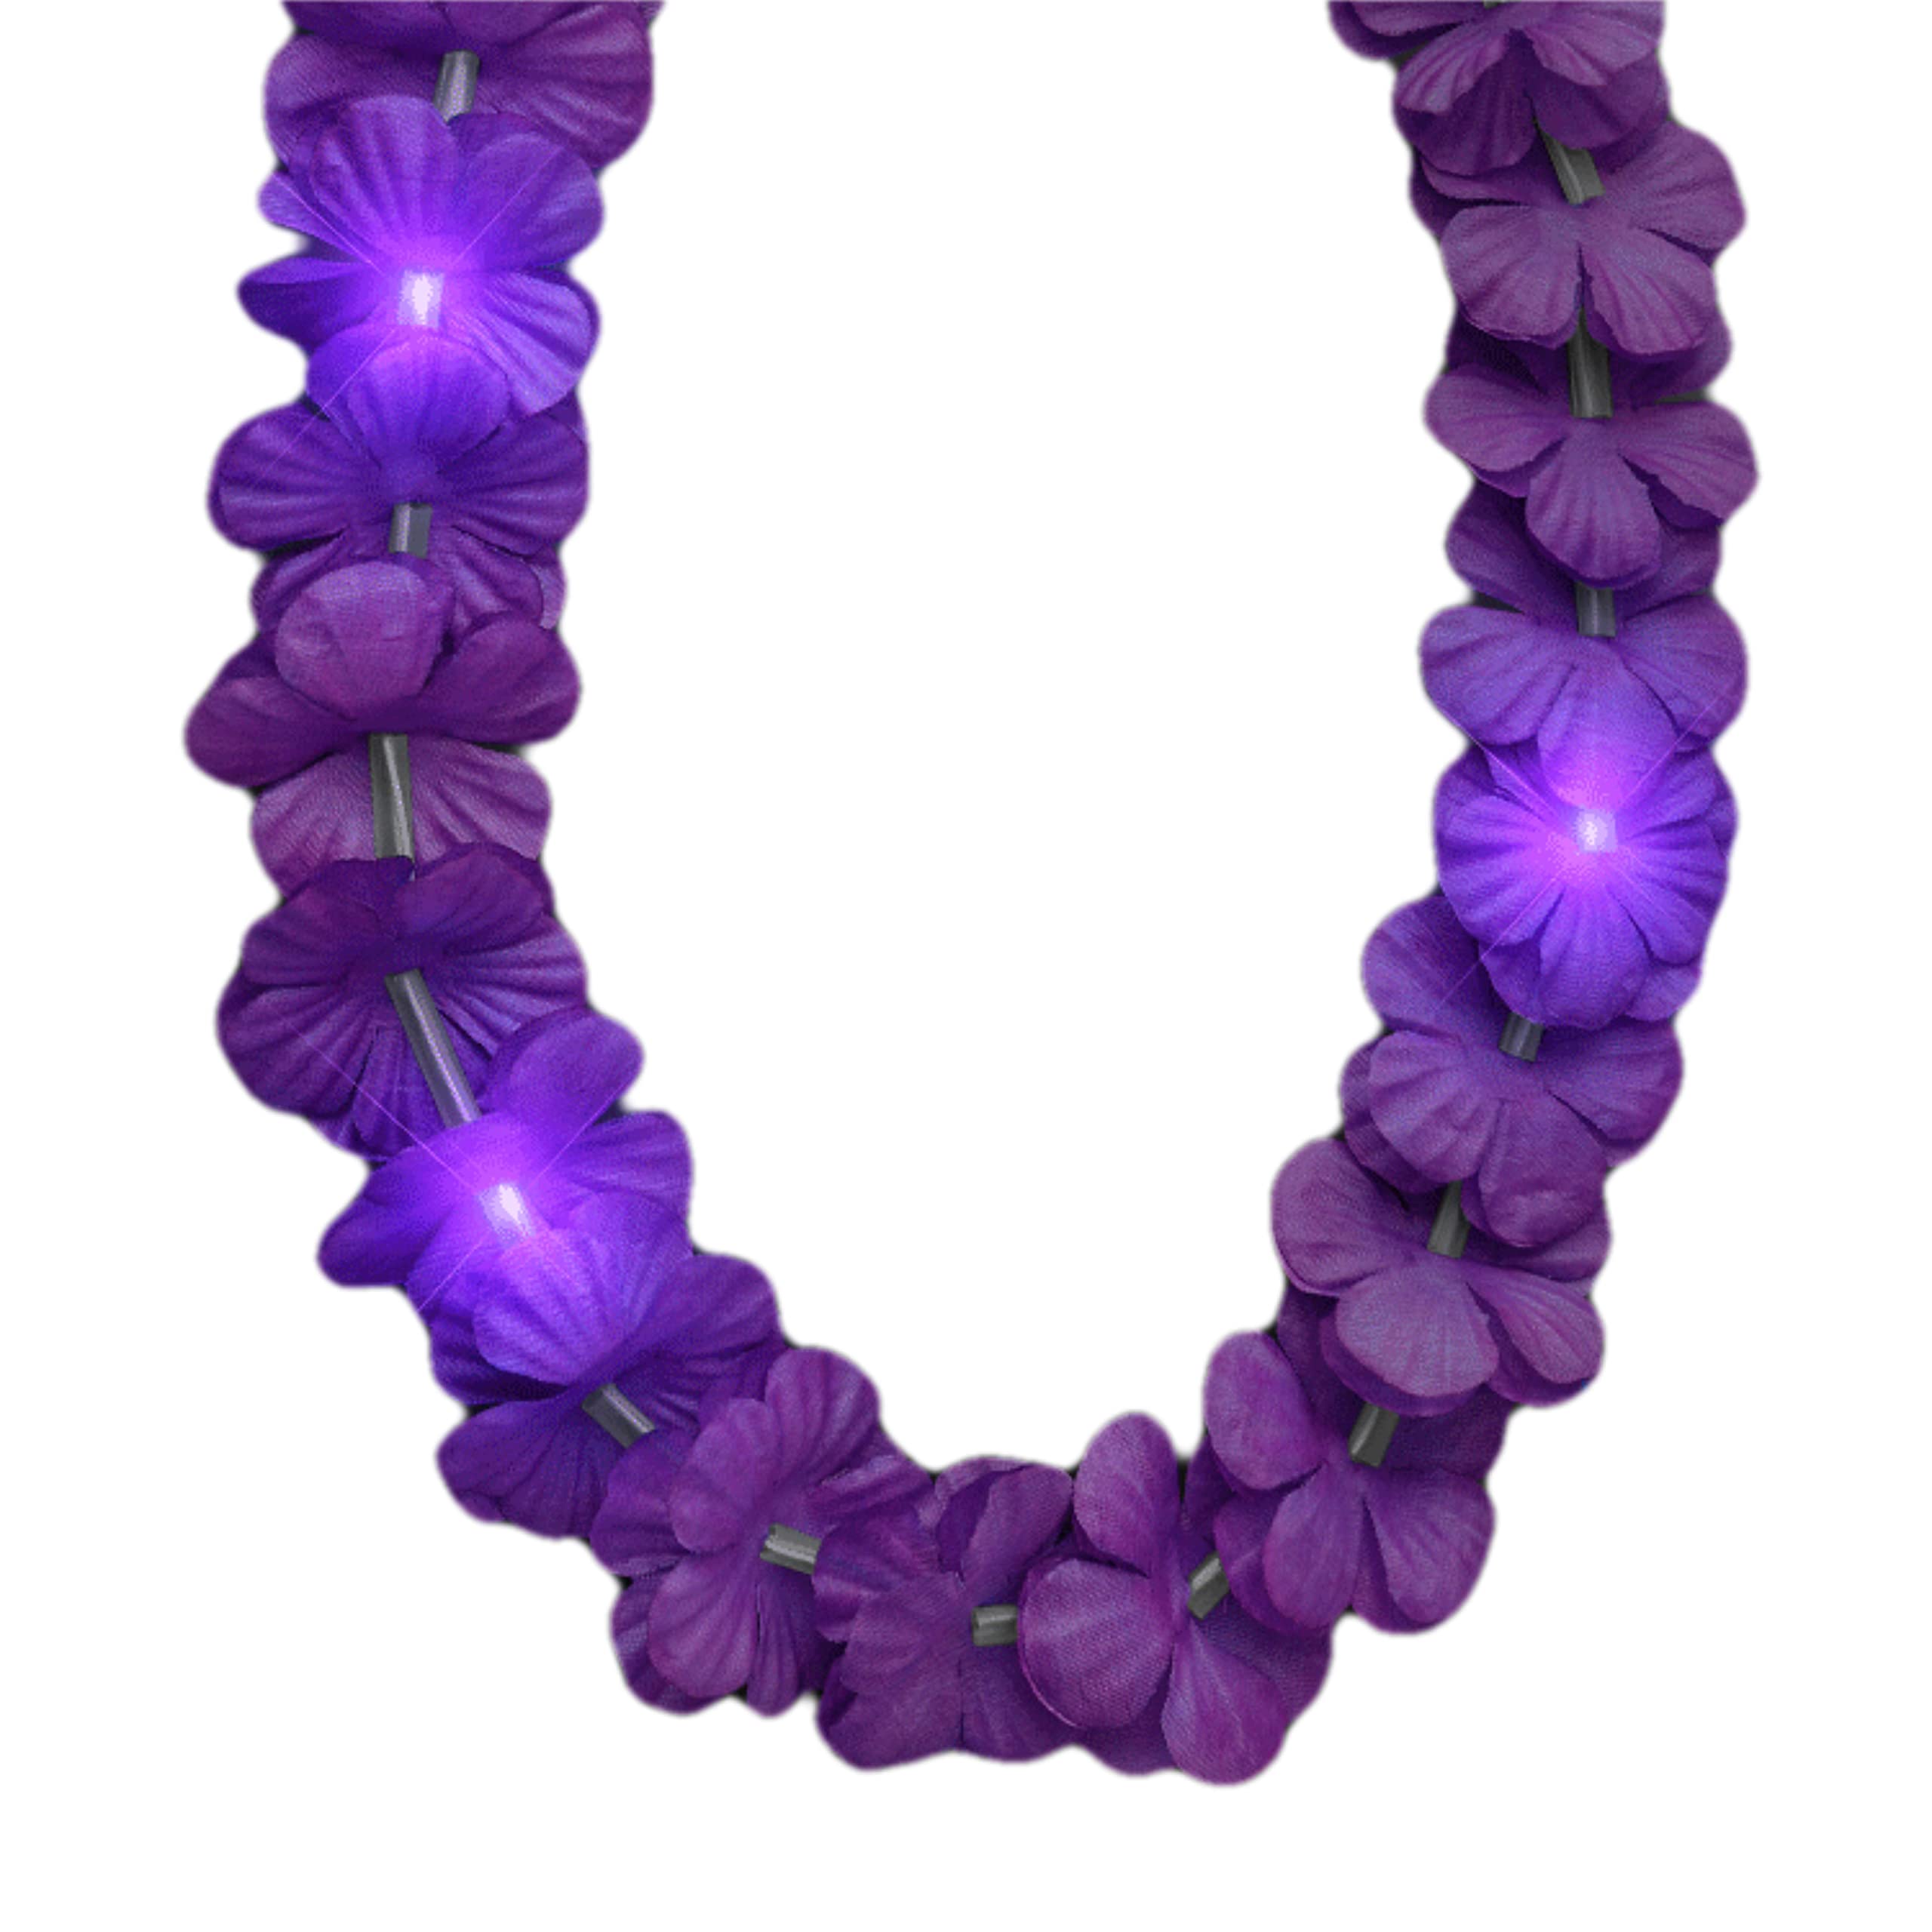 Blinkee LED Hawaiian Flower Lei Necklace - Purple Light-Up Luau Party Accessory: Non-Metallic, 6 LEDs, Replaceable Batteries